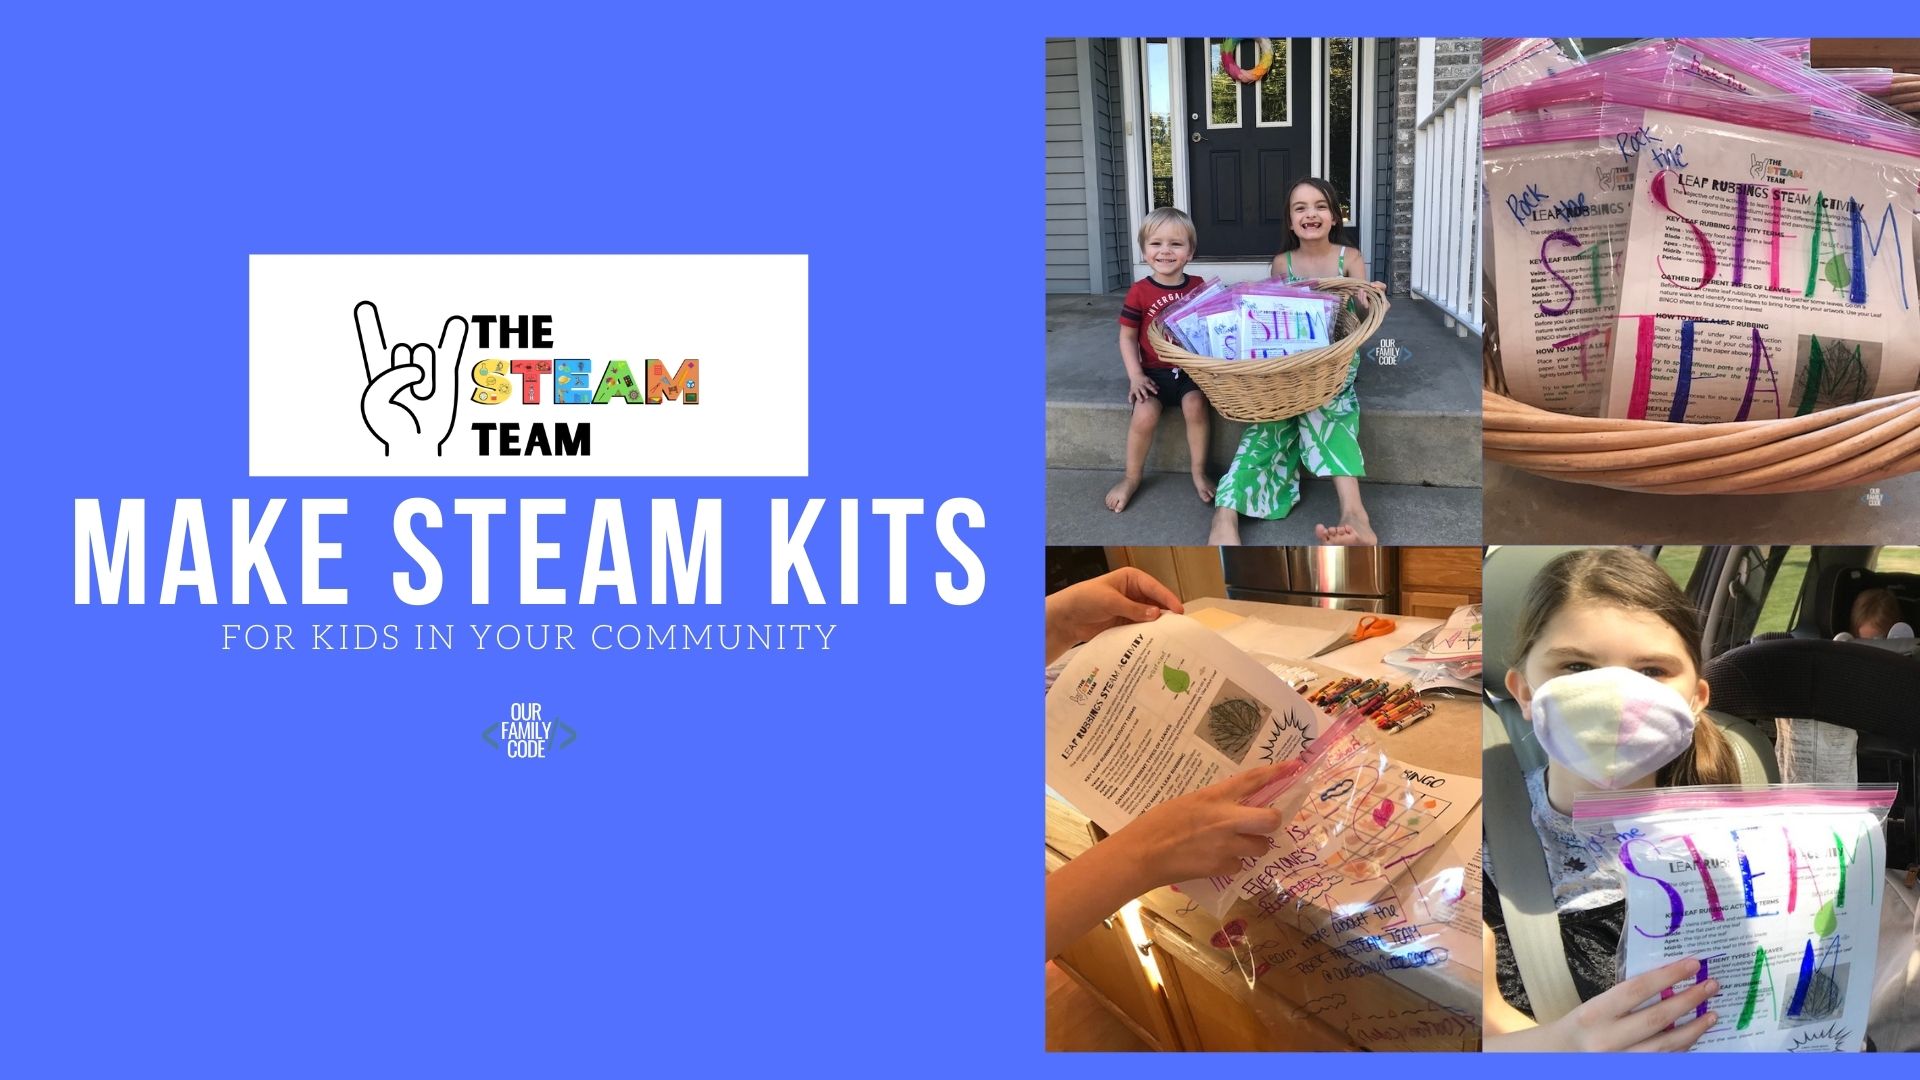 Rock the STEAM Kits: Community Project